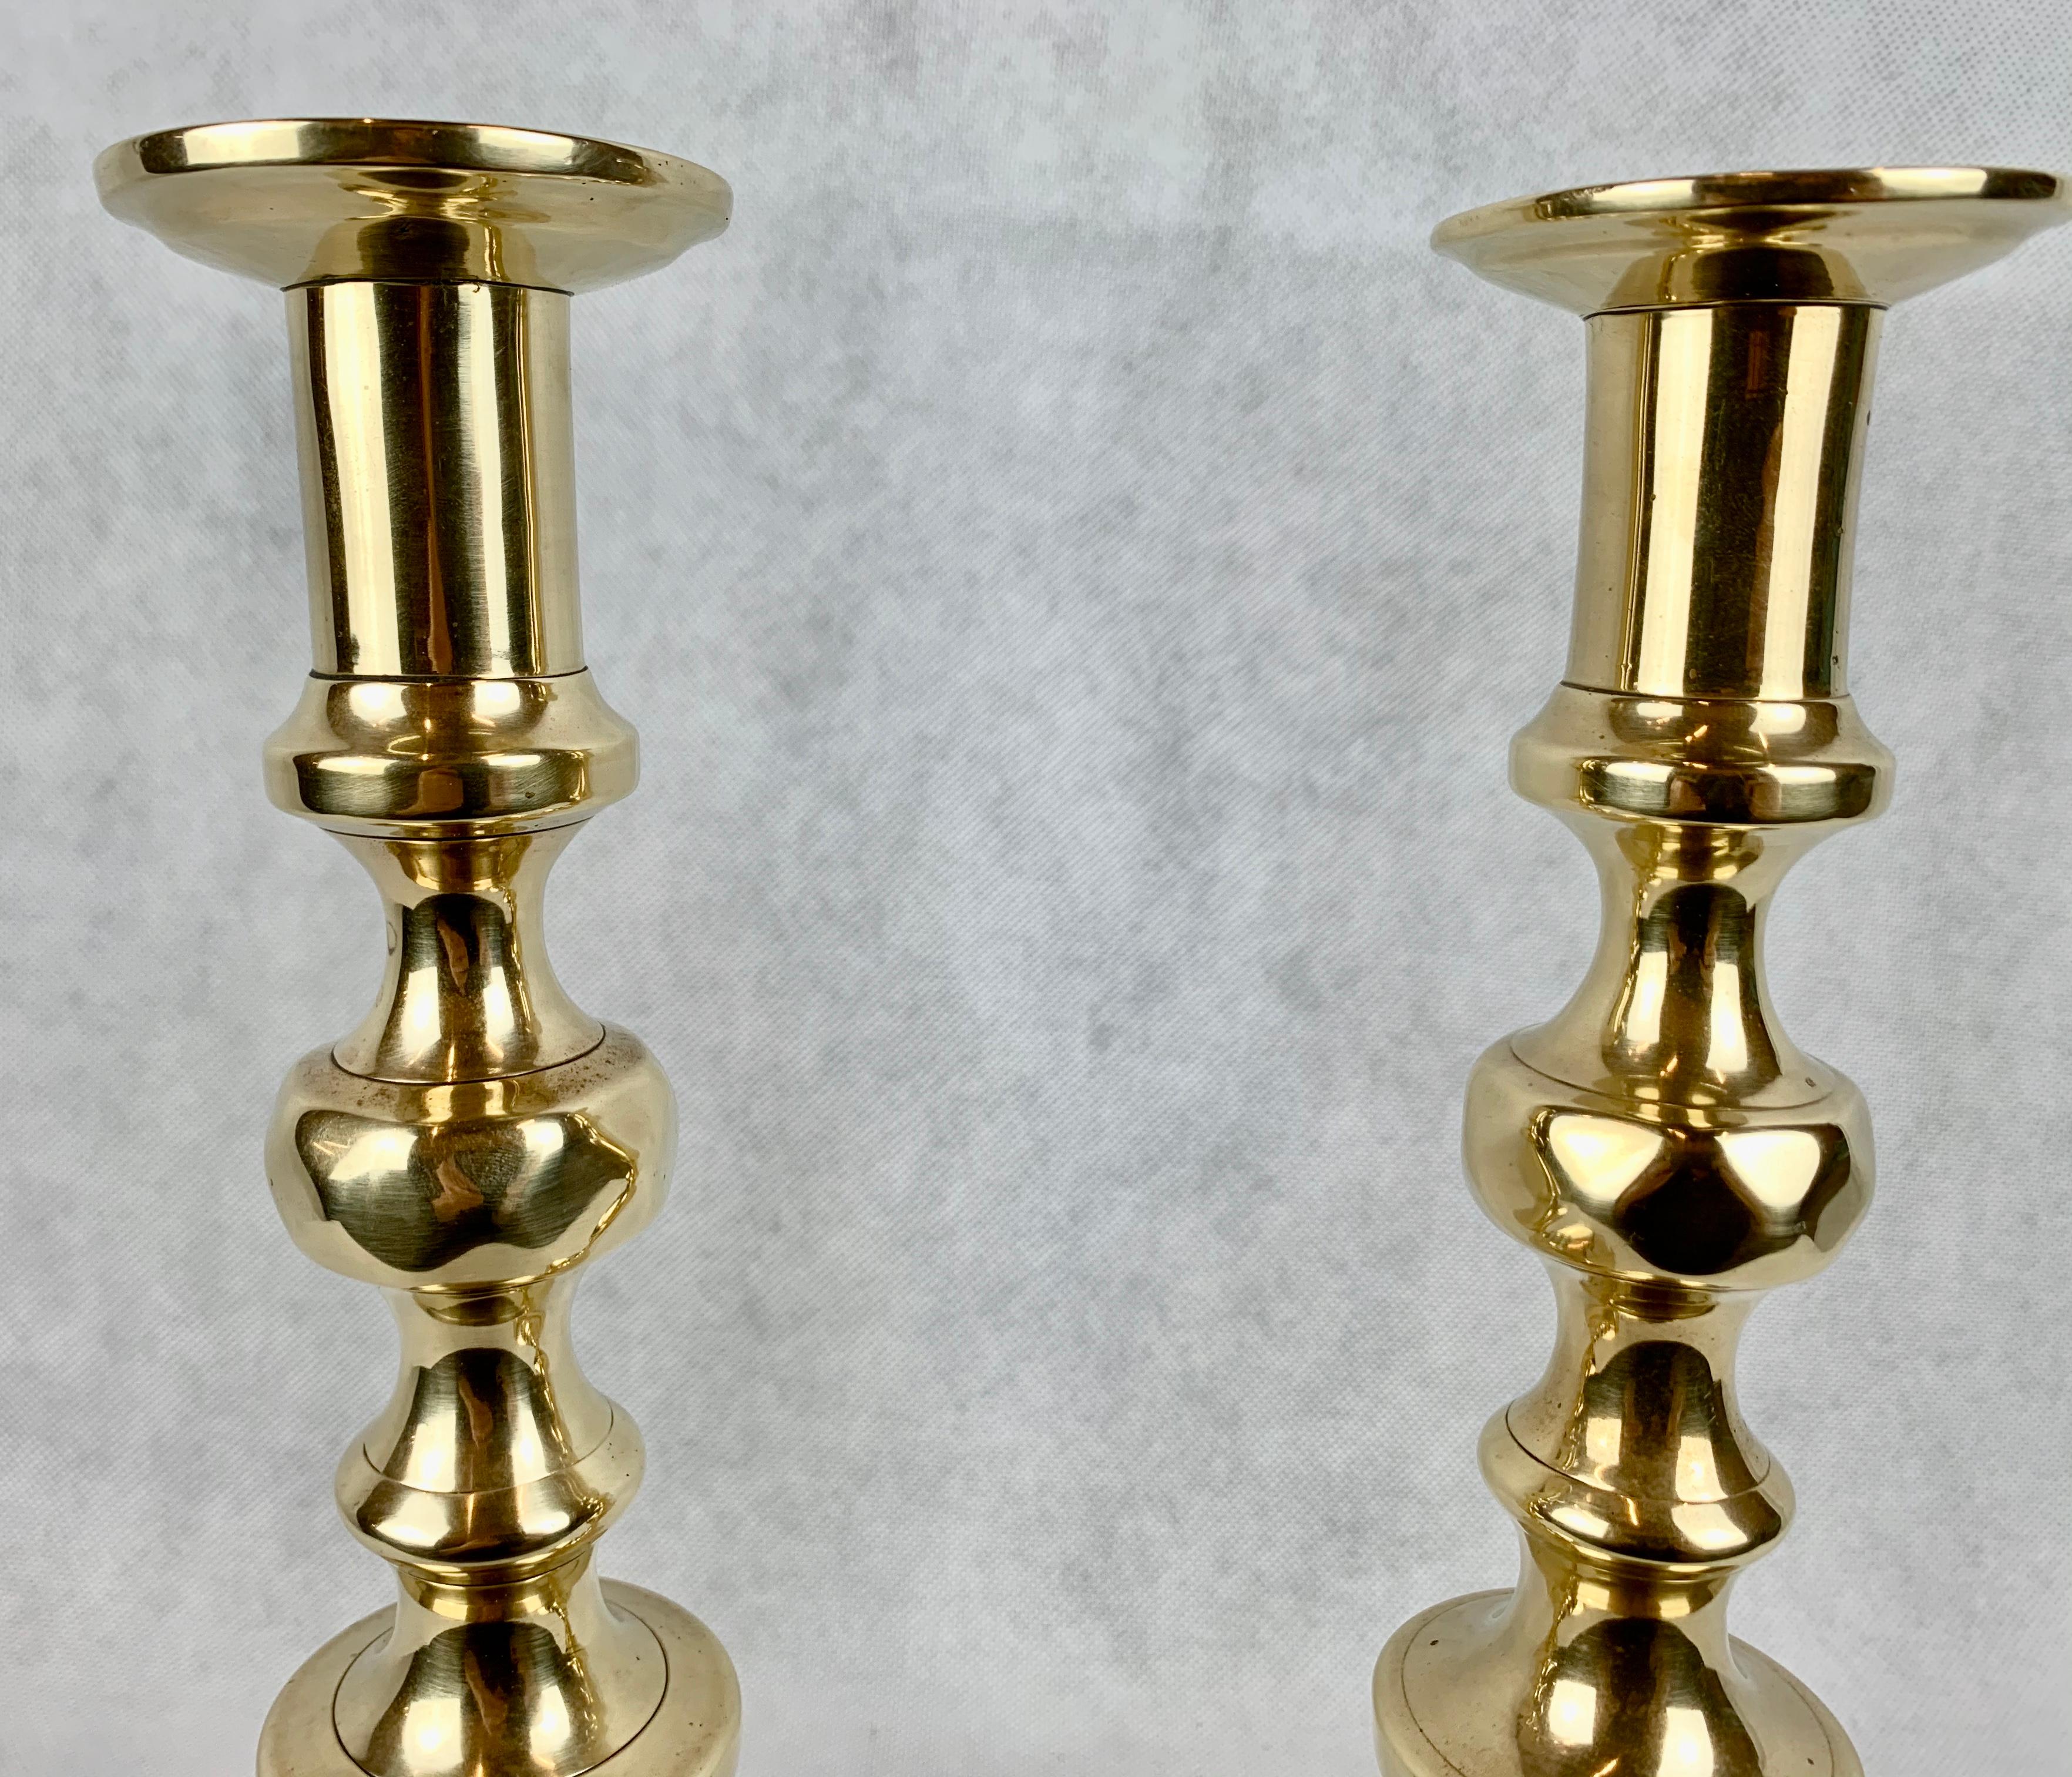 A pair of English Georgian brass beehive and diamond candlesticks with their push-up mechanisms intact. The push-up mechanism was a means of pushing the old wax out through the top of the candlestick.
Polished by hand in our workshop.   (We go